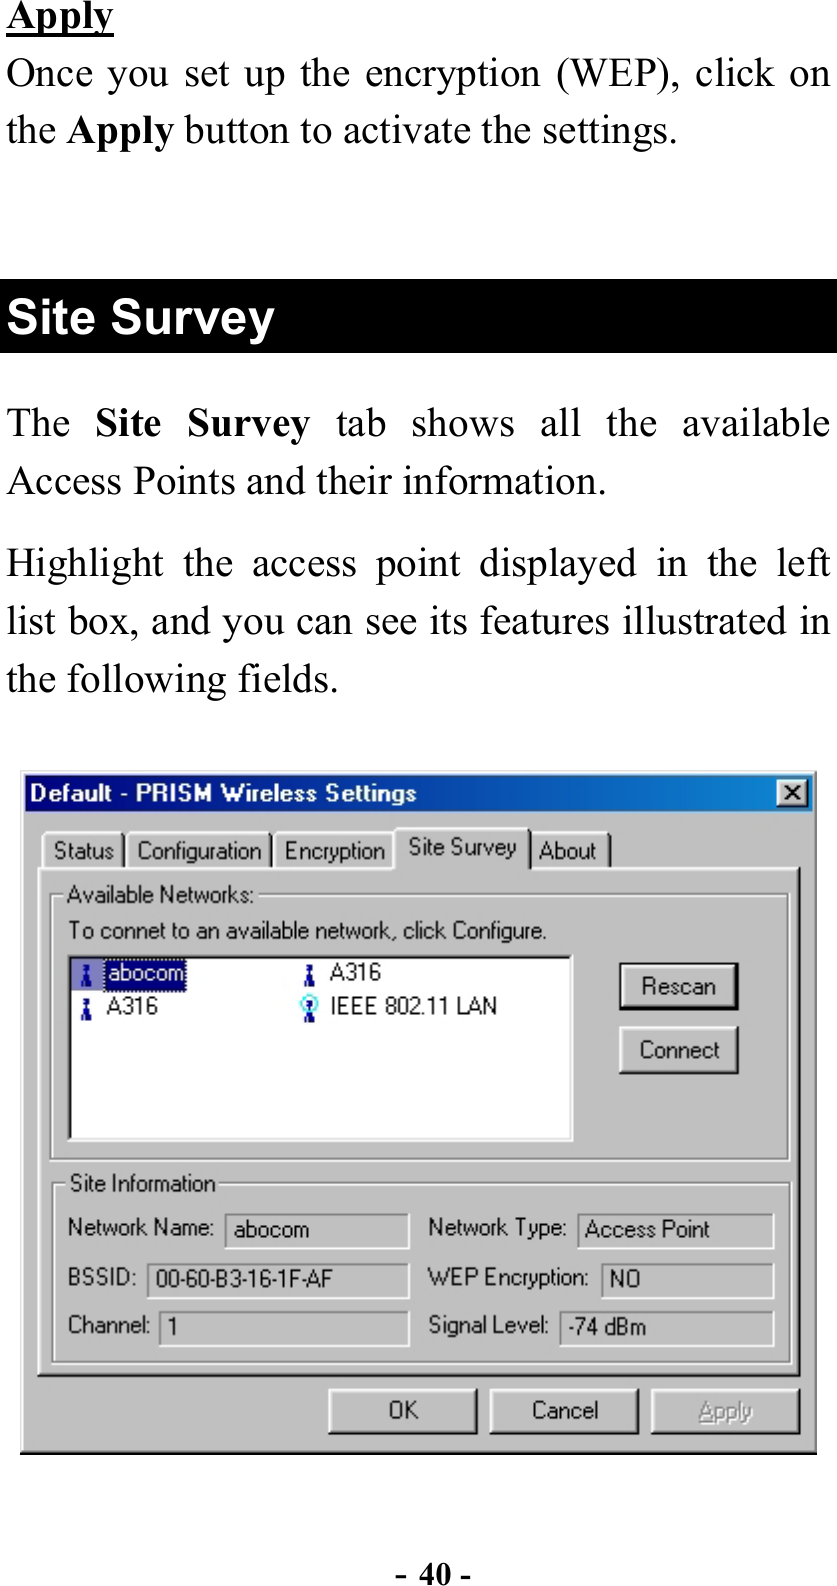  - 40 - Apply Once you set up the encryption (WEP), click on the Apply button to activate the settings.  Site Survey The  Site Survey tab shows all the available Access Points and their information. Highlight the access point displayed in the left list box, and you can see its features illustrated in the following fields.  